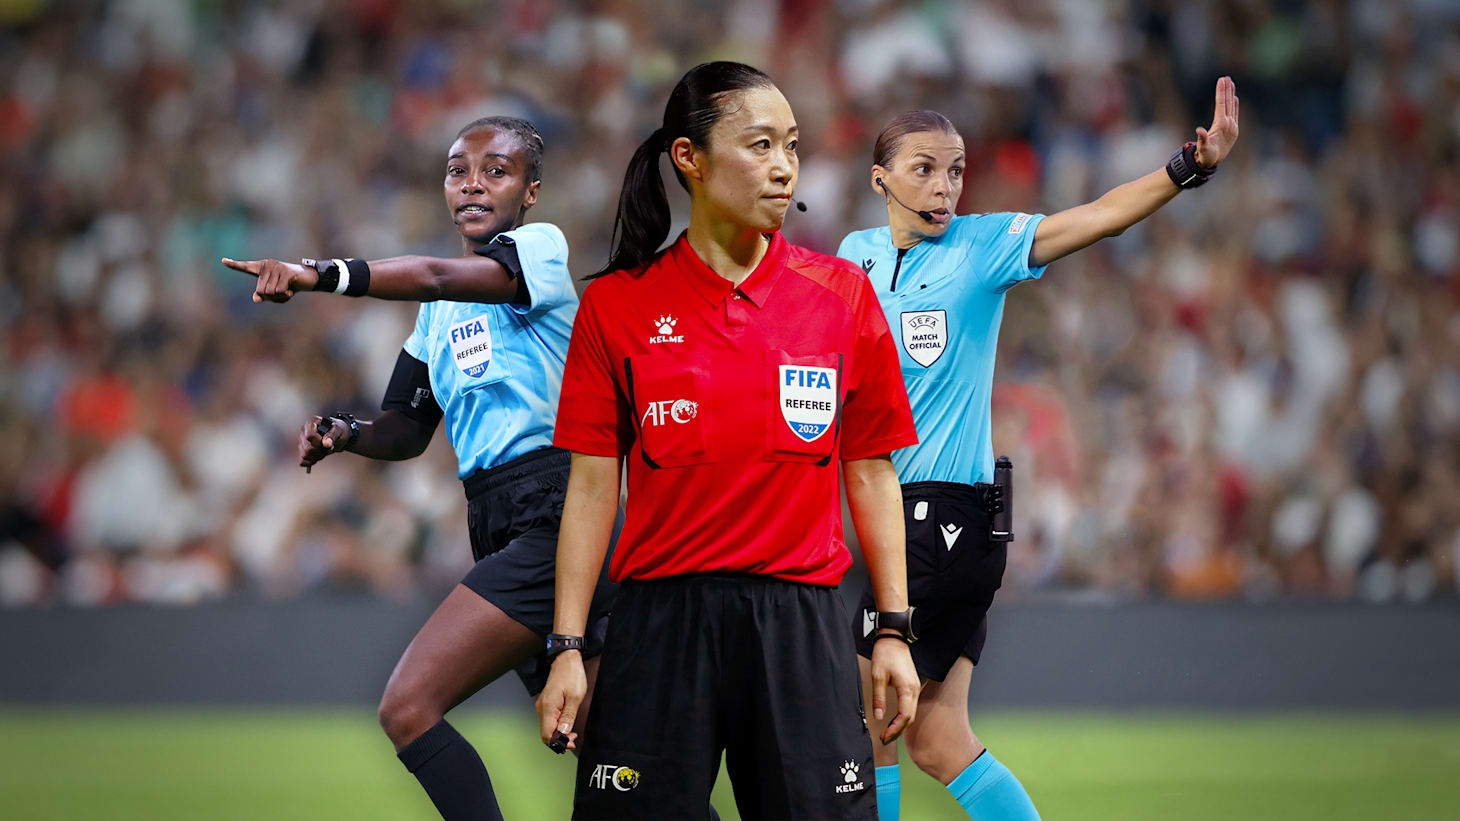 FIFA World Cup 2022 Stephanie Frappart, Women referees